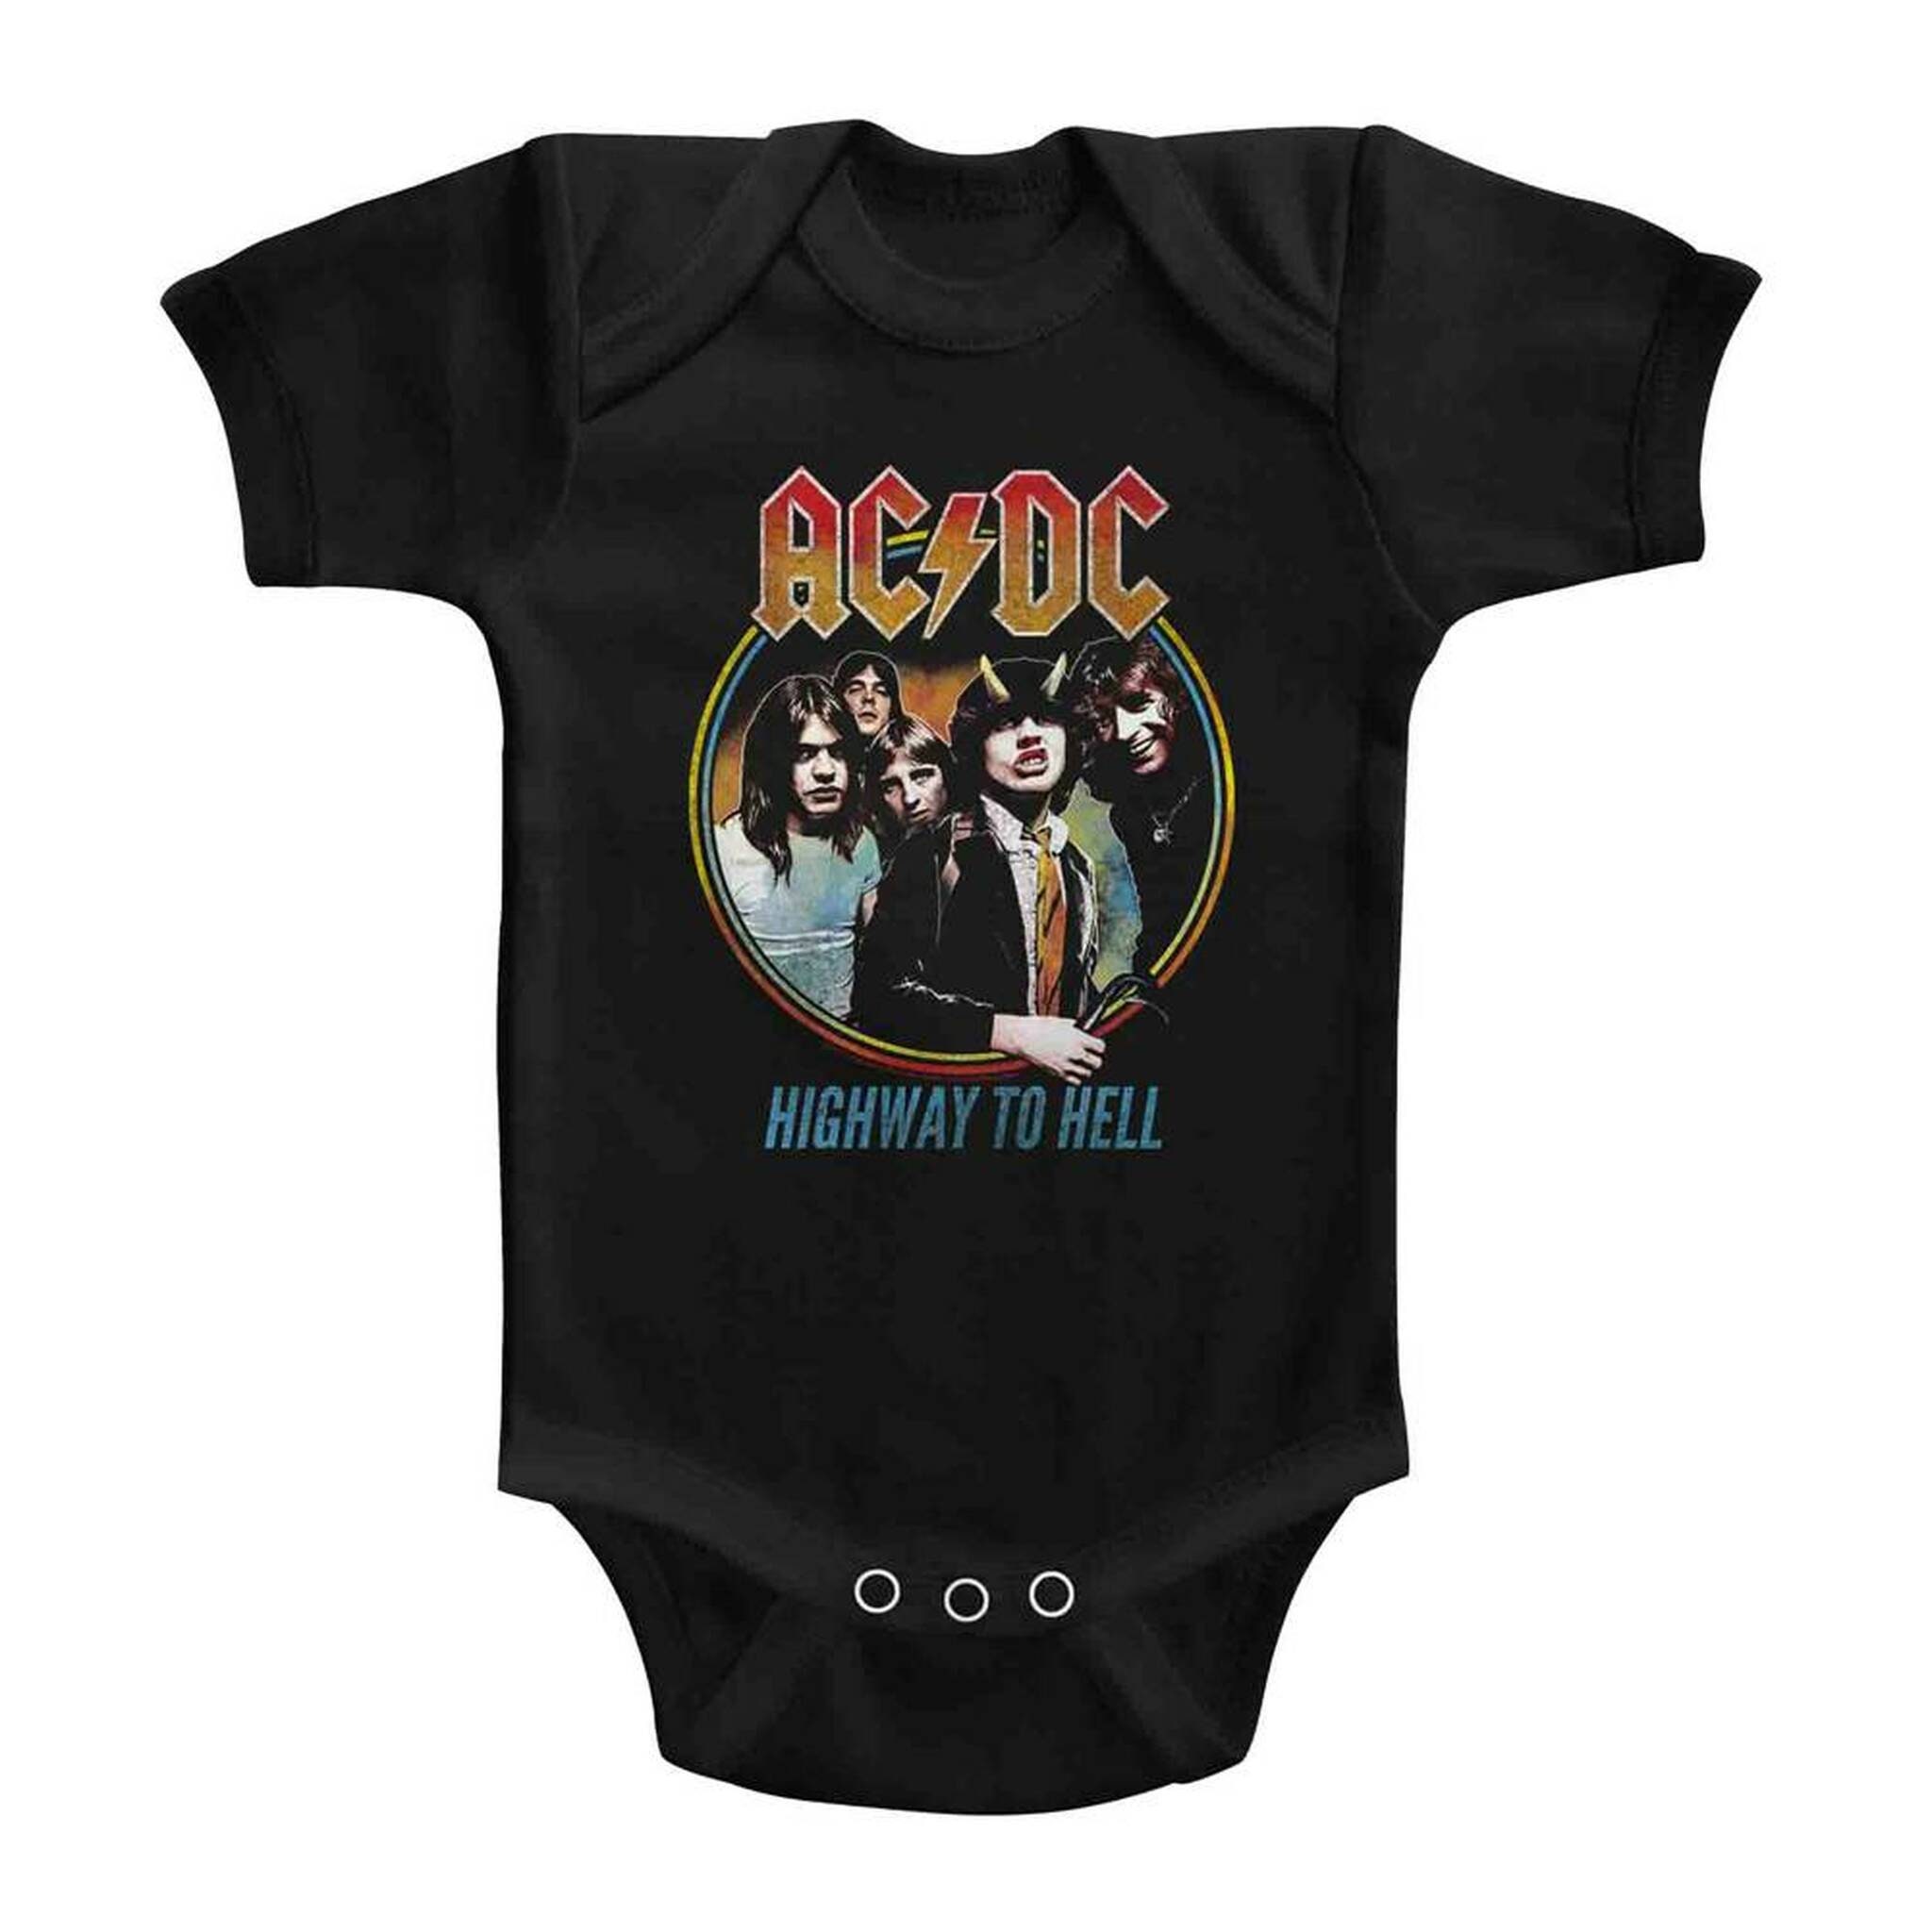 AC/DC Highway To Hell Tricolor Black Infant Baby Onesie T-Shirt